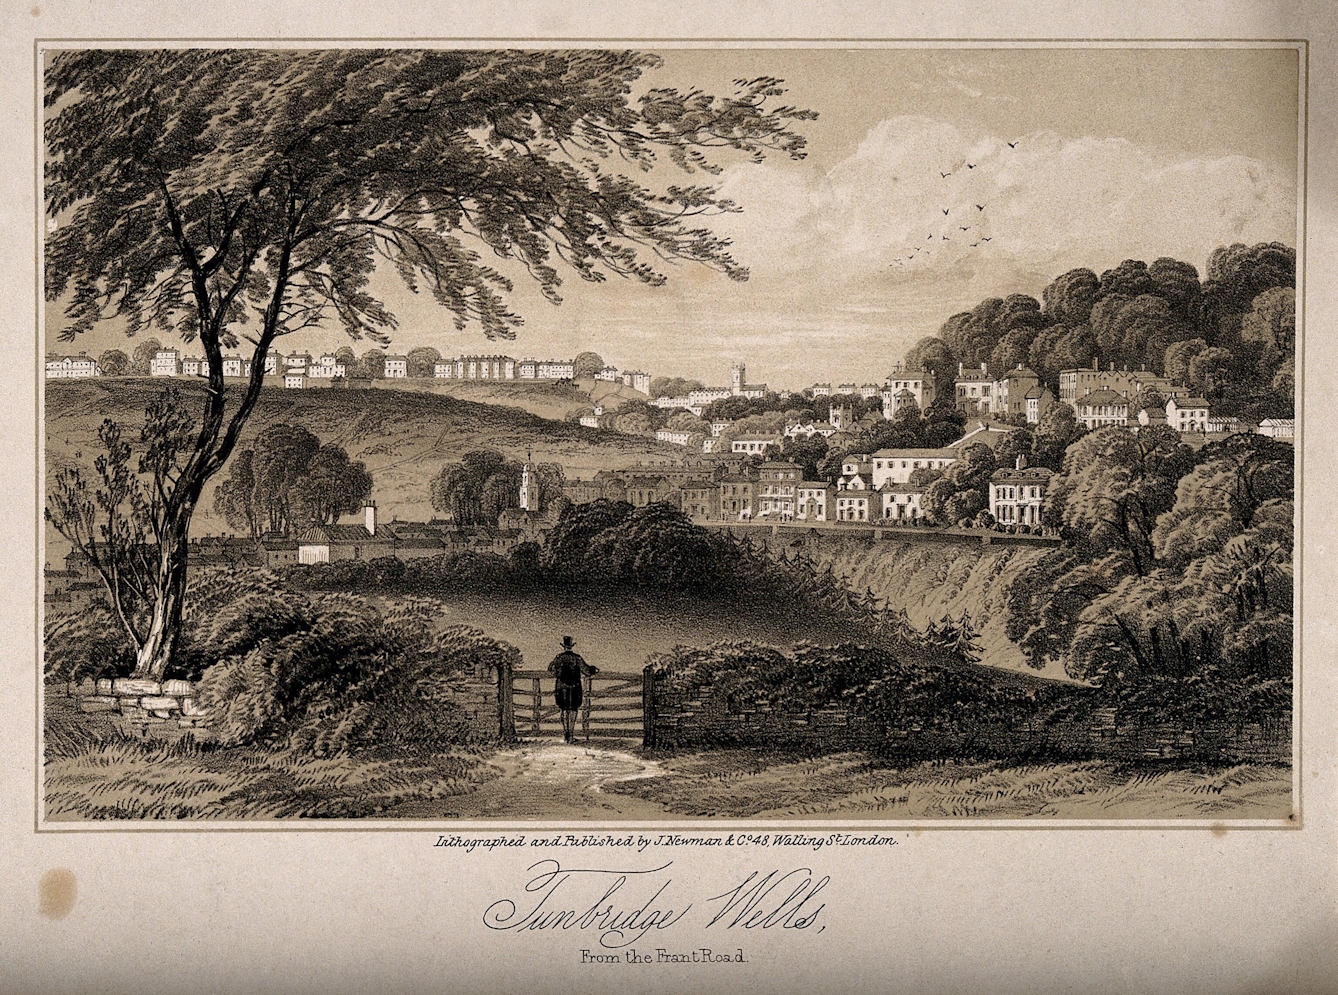 Tinted lithograph showing a panoramic view from Frant Road in Tunbridge Wells, Kent. In the foreground there is a man wearing a top hat, standing in front of a wooden gate. He is looking on to a view of trees and houses. 


